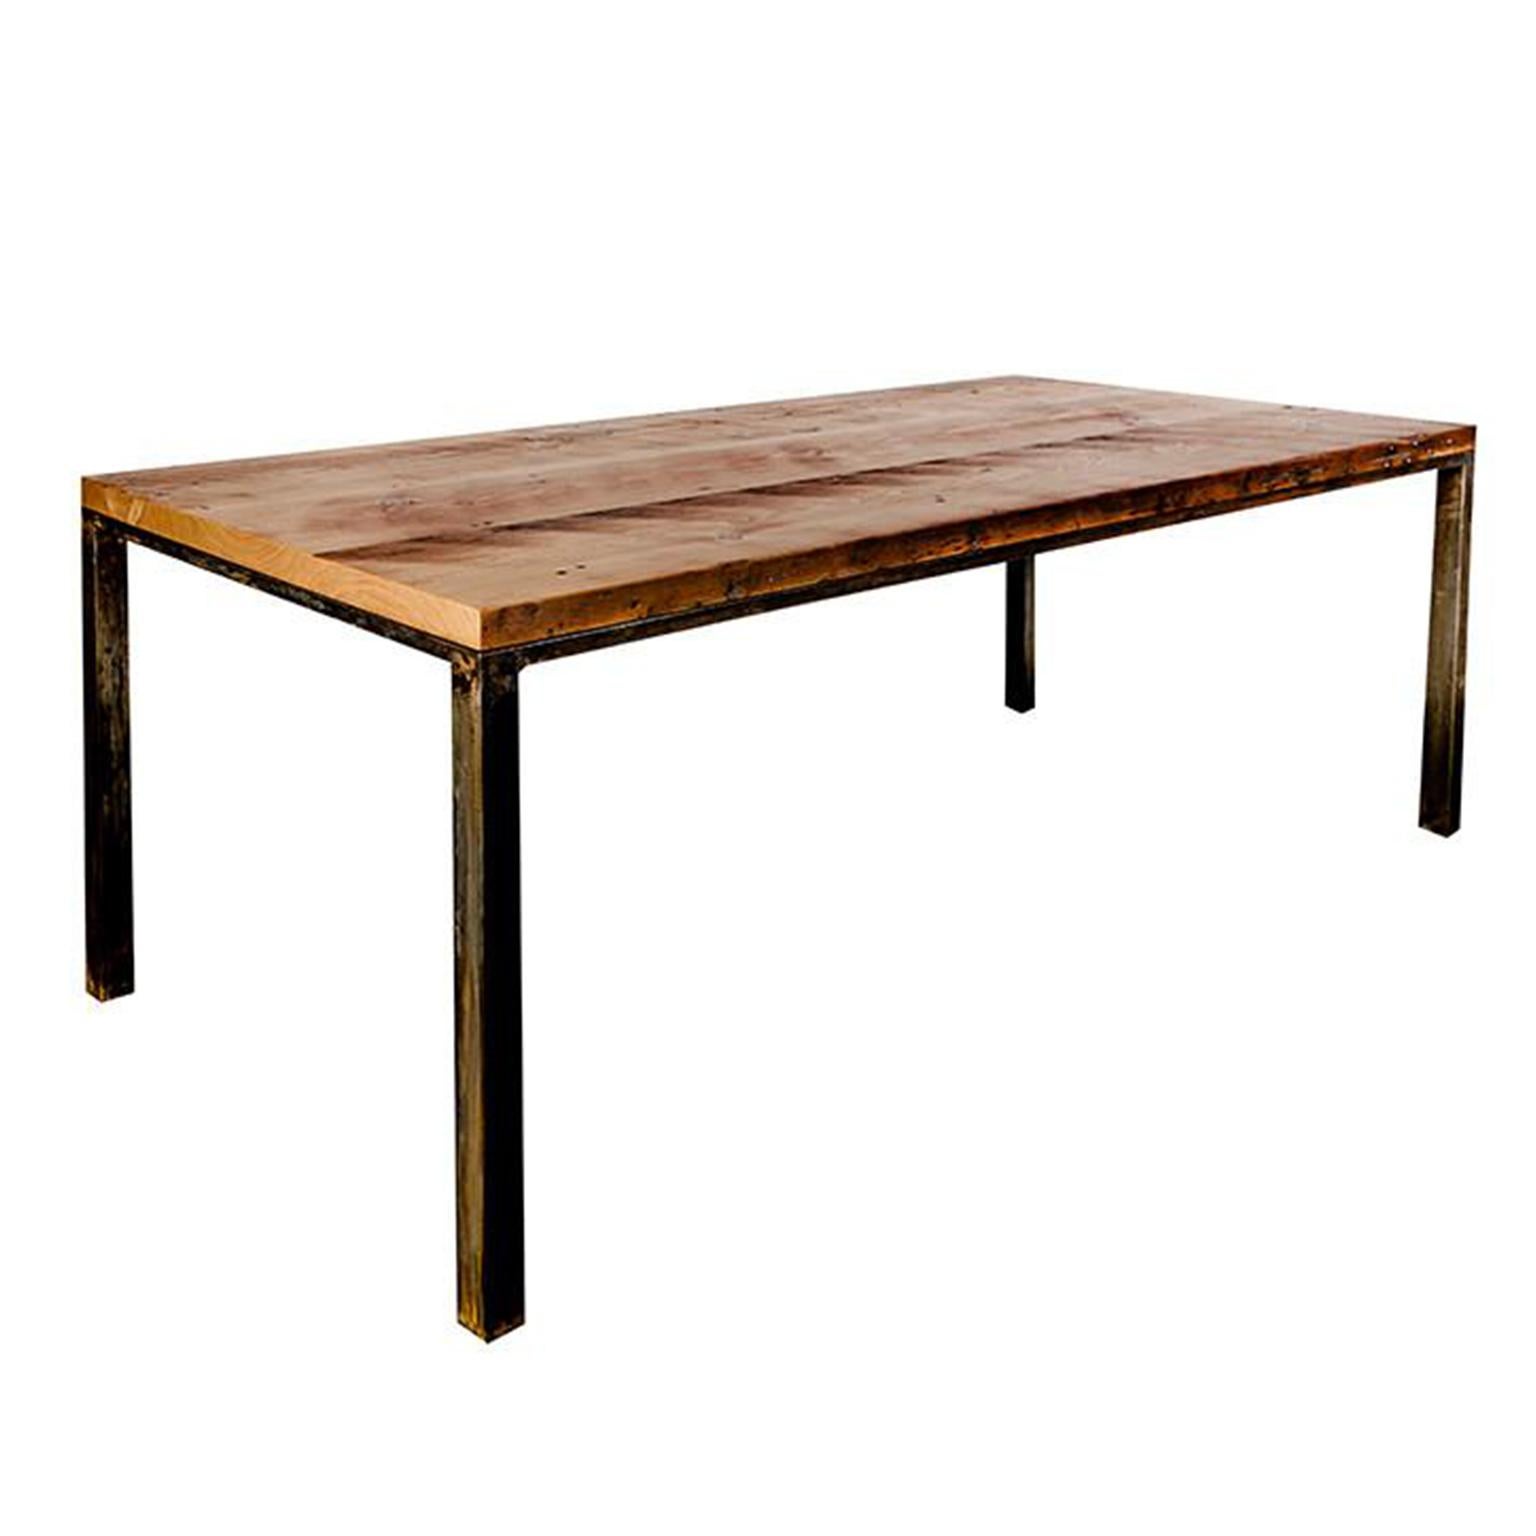 Custom Industrial "Workshop Table" with Solid Wood Top and Steel Base, Small